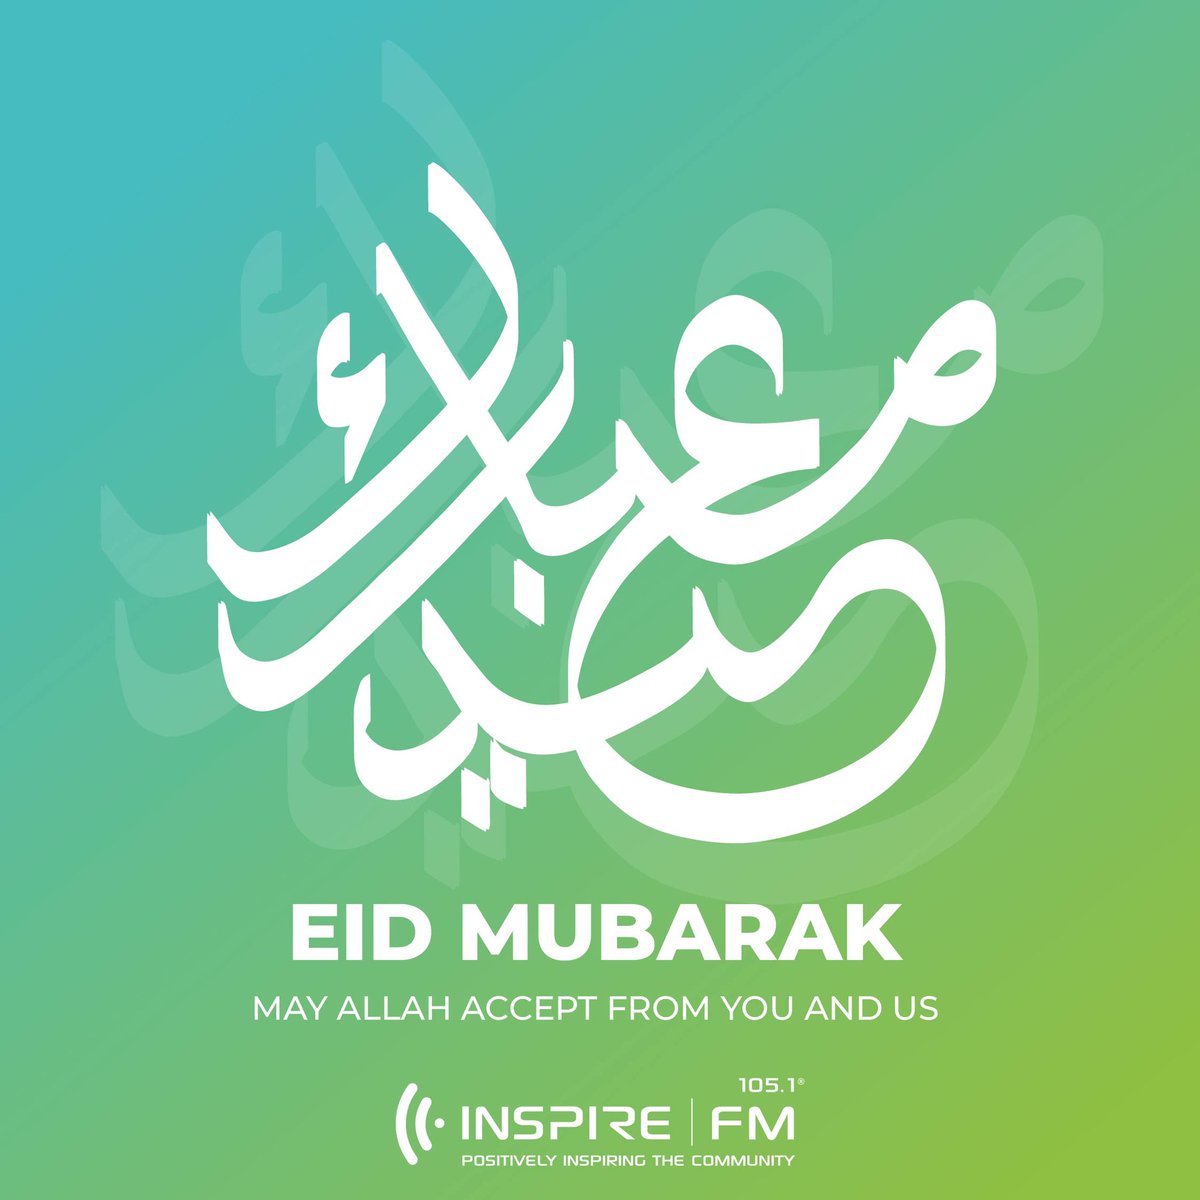 Eid Mubarak from all of us at Inspire FM.